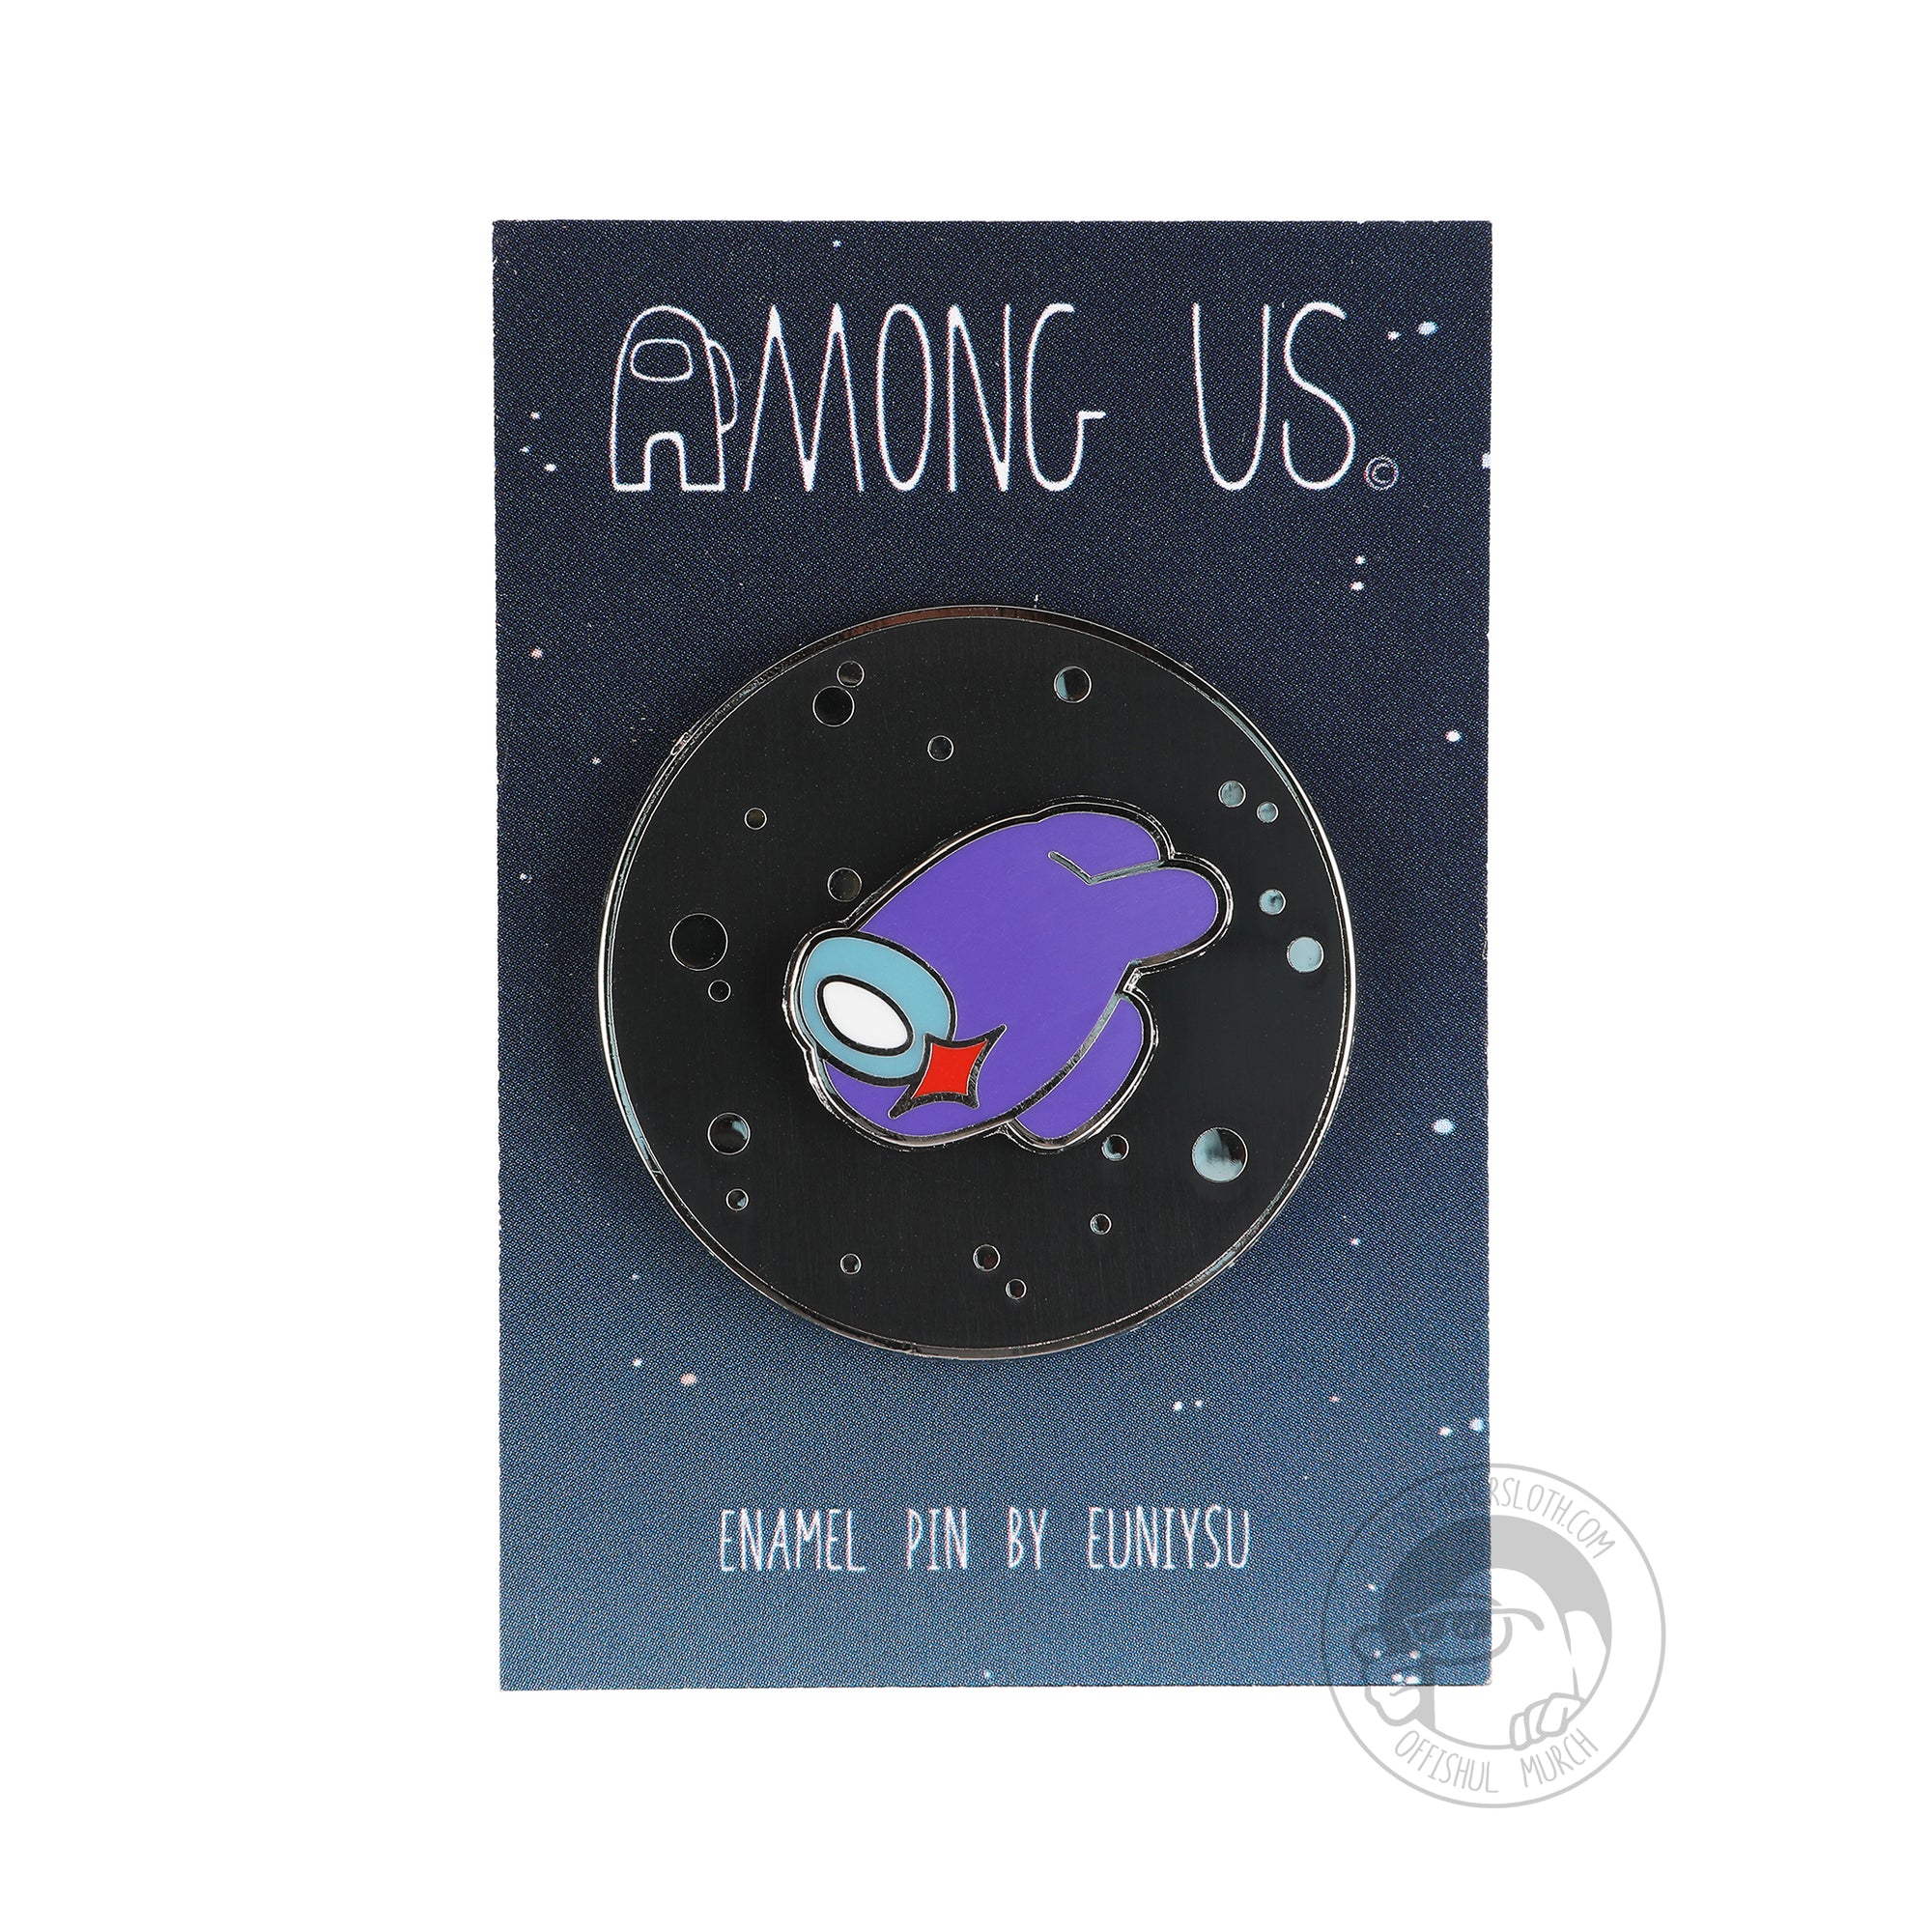 A gif image of a model spinning the purple crewmate on the Among Us: Spinning into Space Enamel Pin. The crewmate spins on a circular black plate with shiny bubbles representing space. 